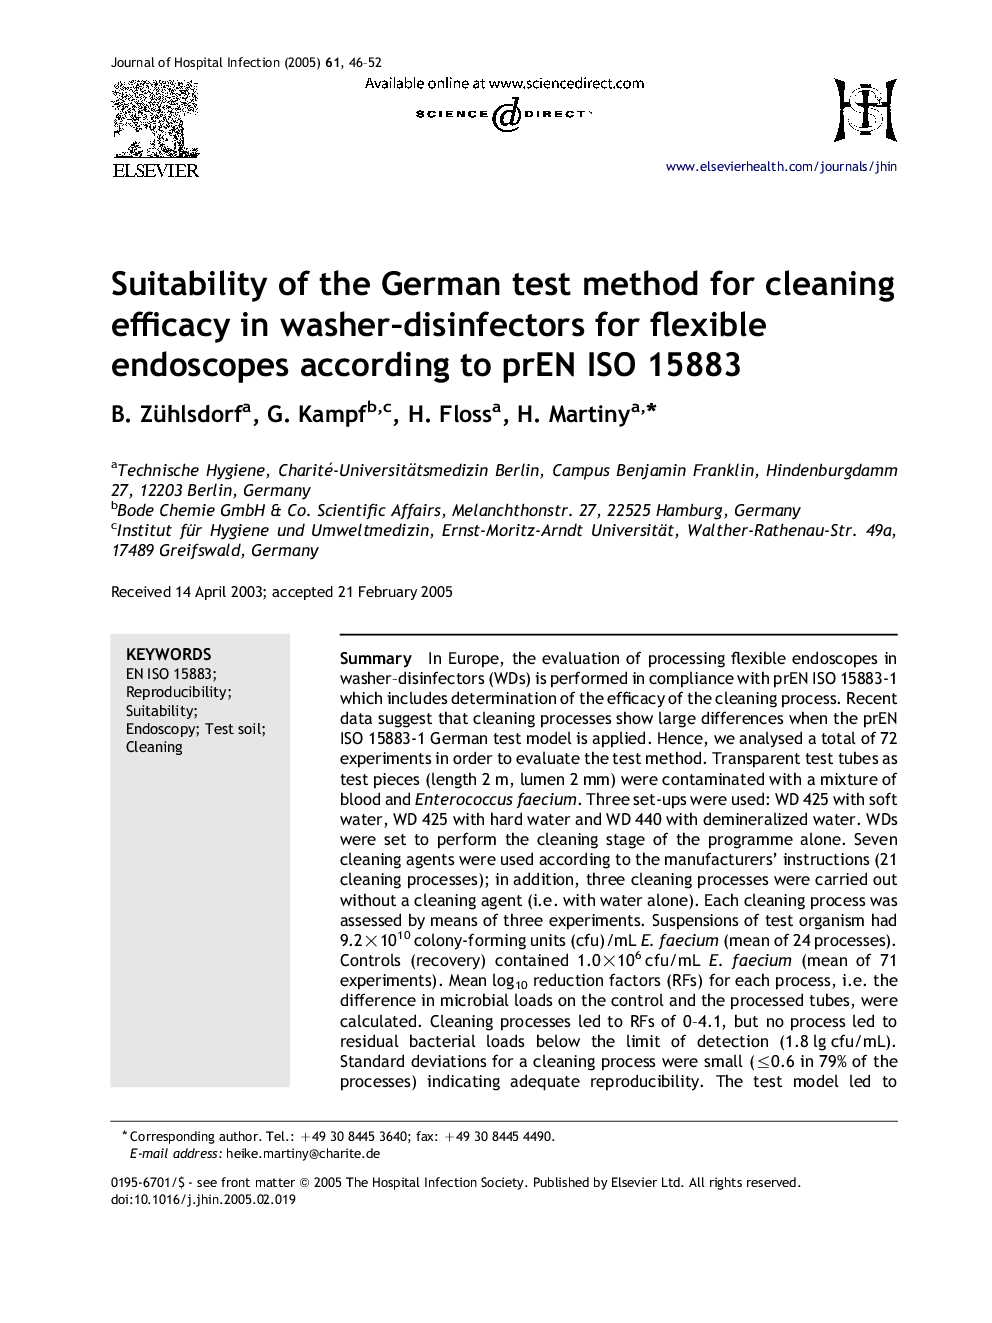 Suitability of the German test method for cleaning efficacy in washer-disinfectors for flexible endoscopes according to prEN ISO 15883